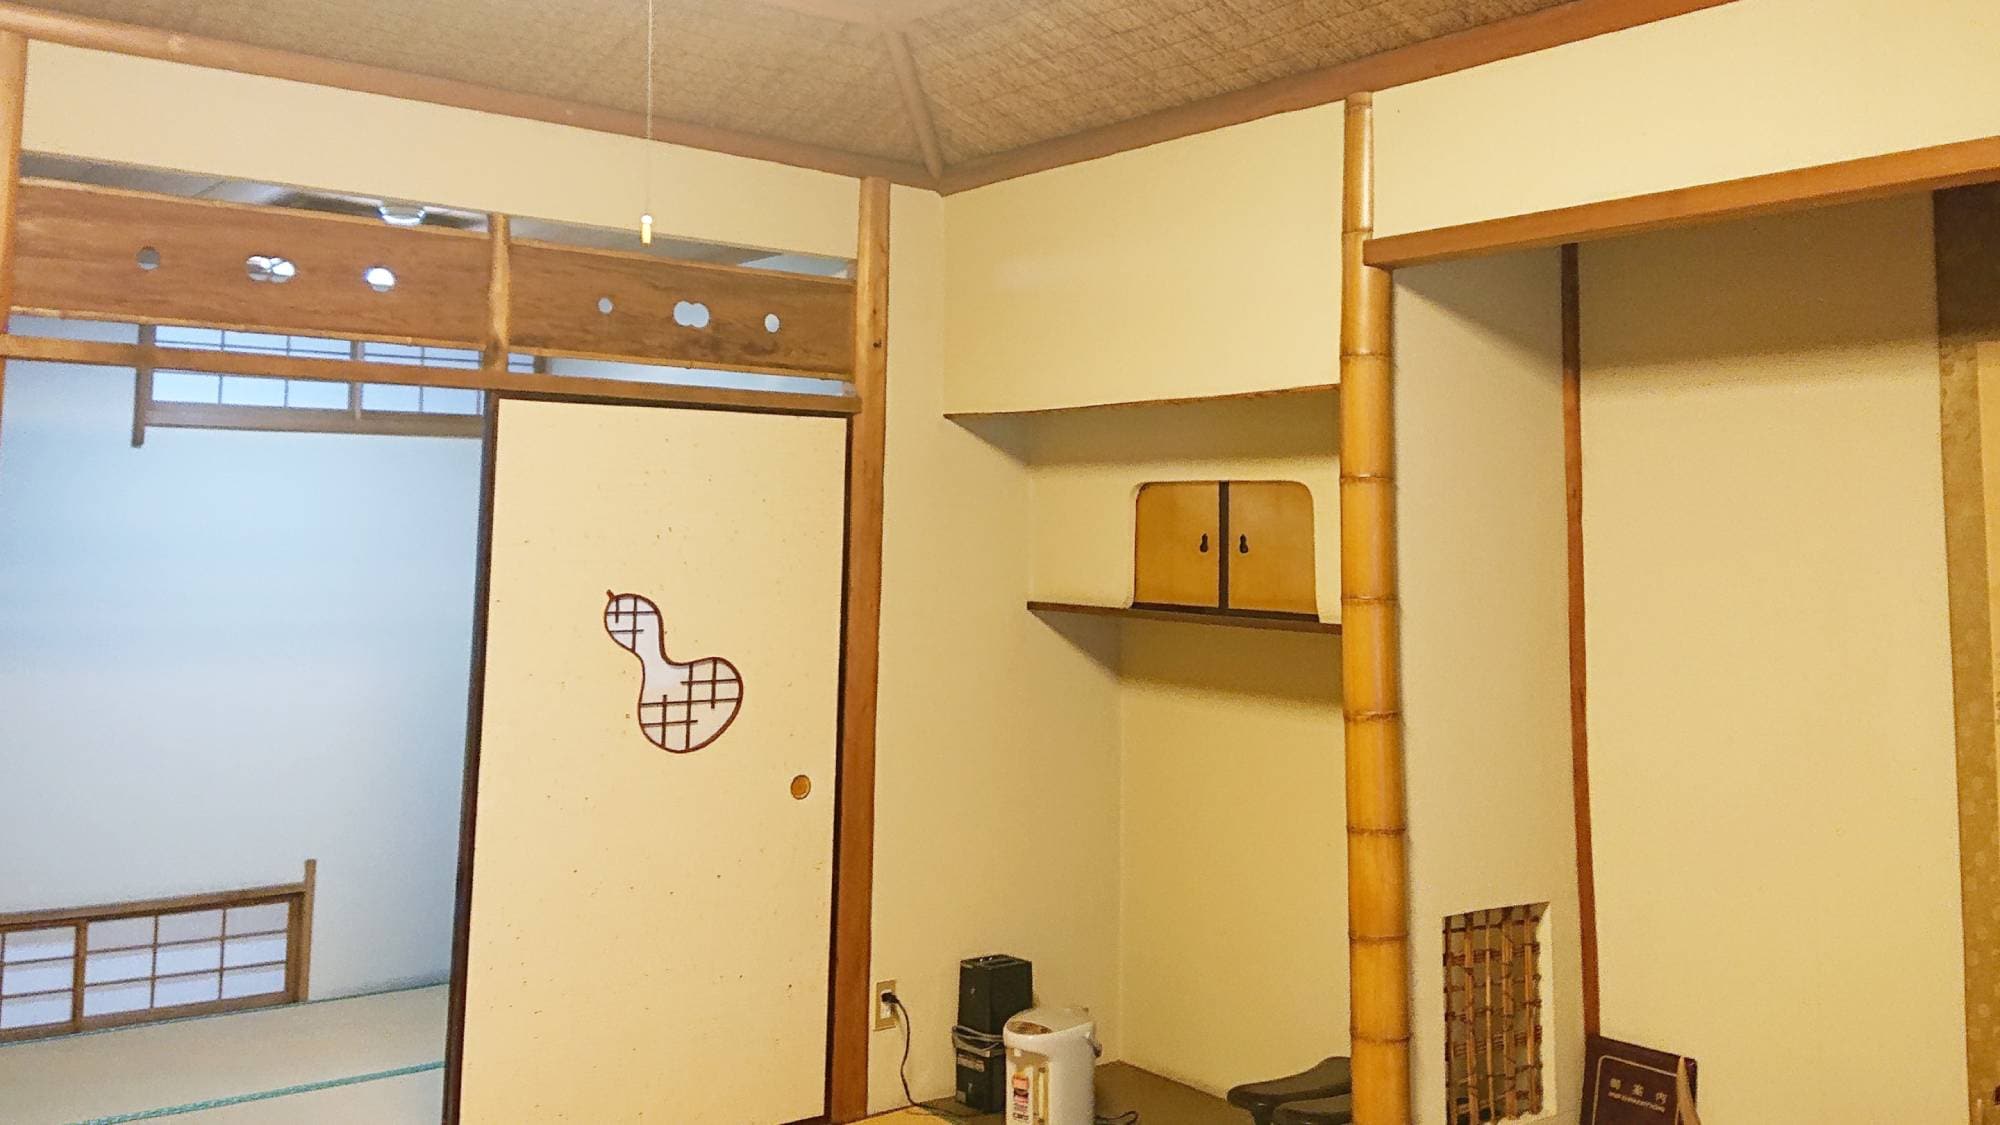 ・ An example of a Japanese-style room with 10 tatami mats (ceiling)